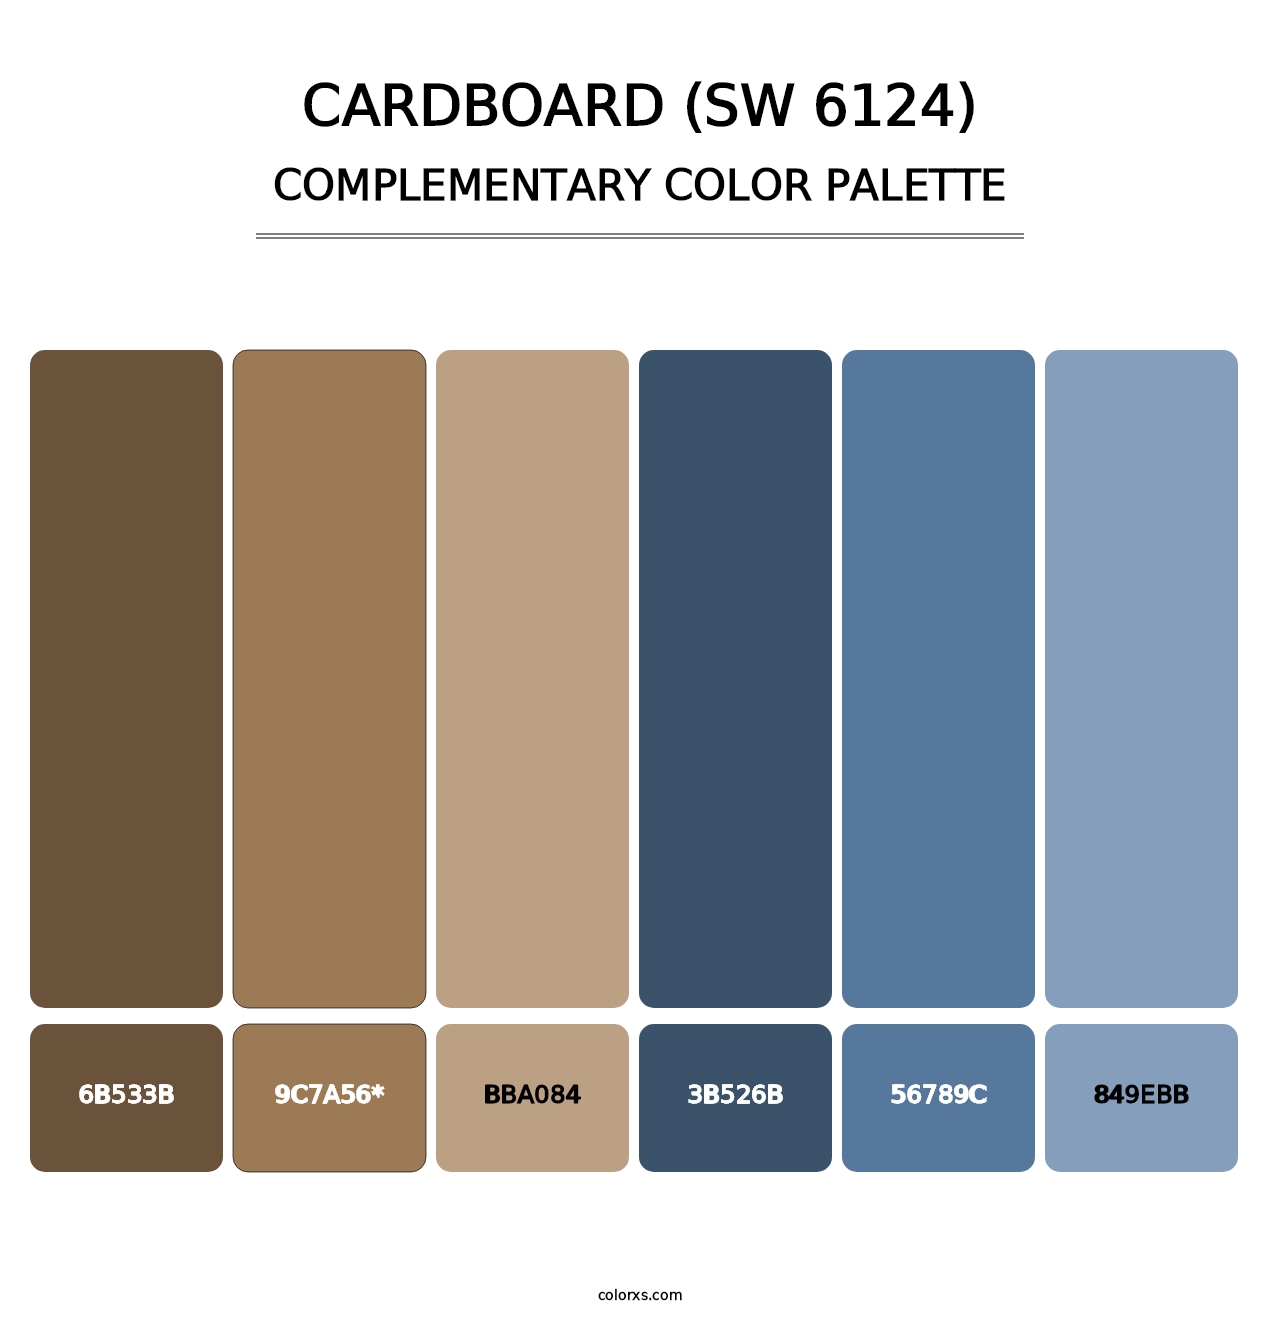 Cardboard (SW 6124) - Complementary Color Palette